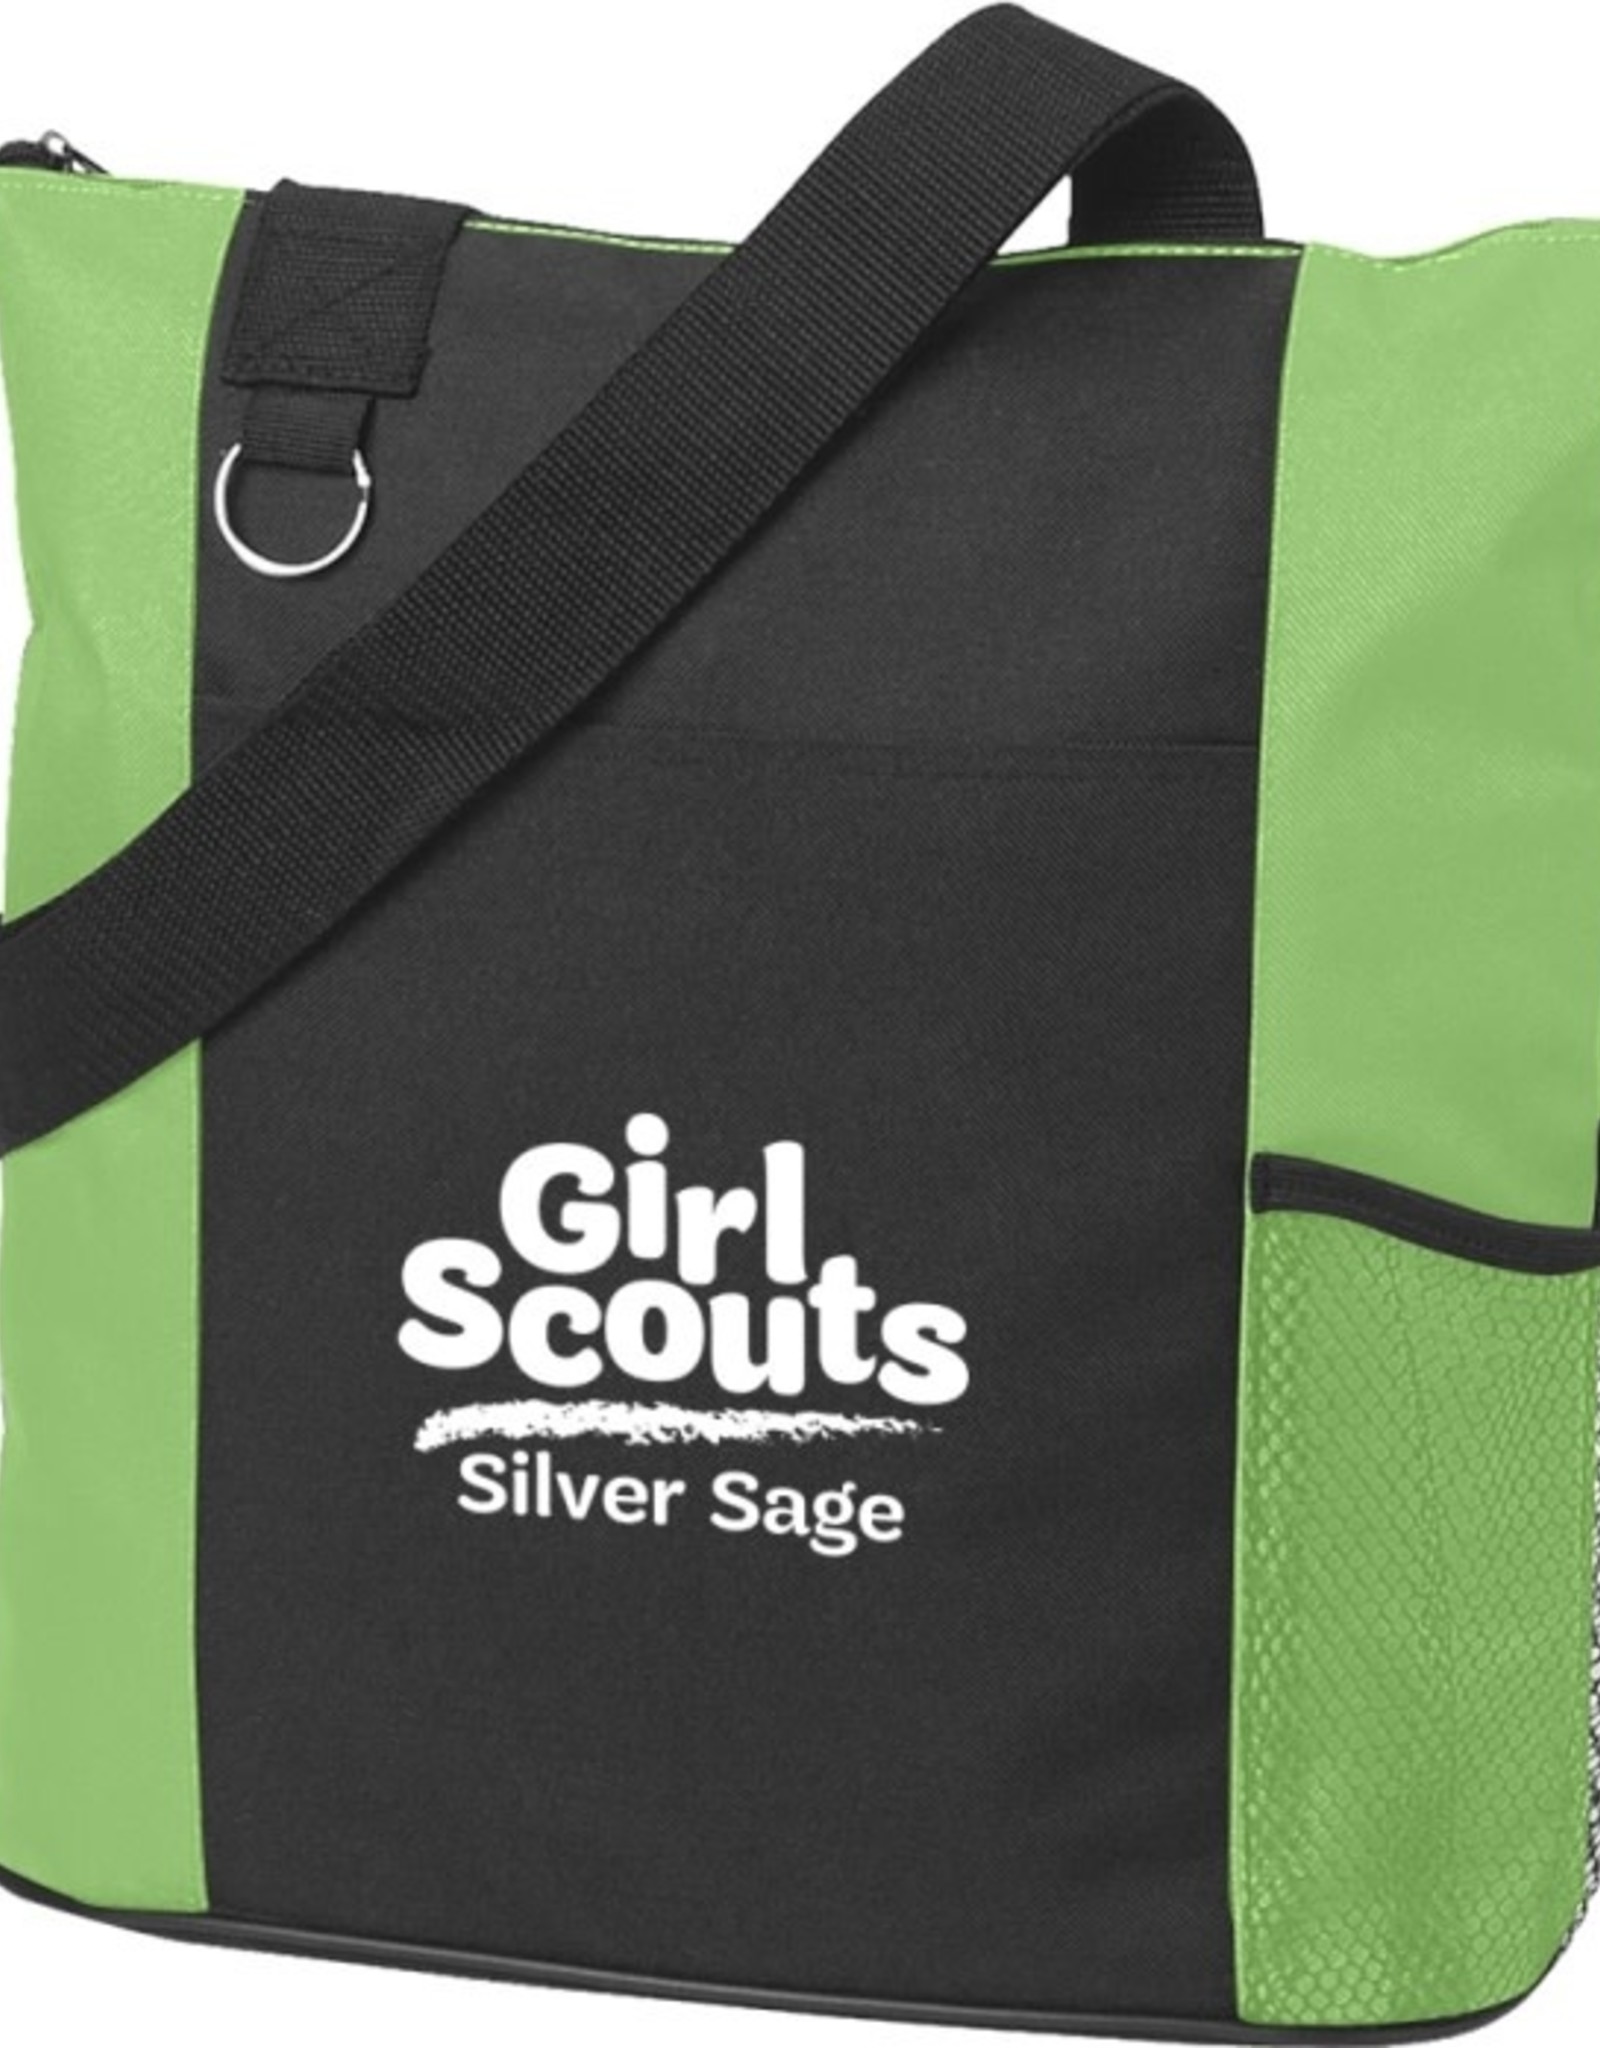 The Roberts Group Silver Sage Fun Tote Assorted